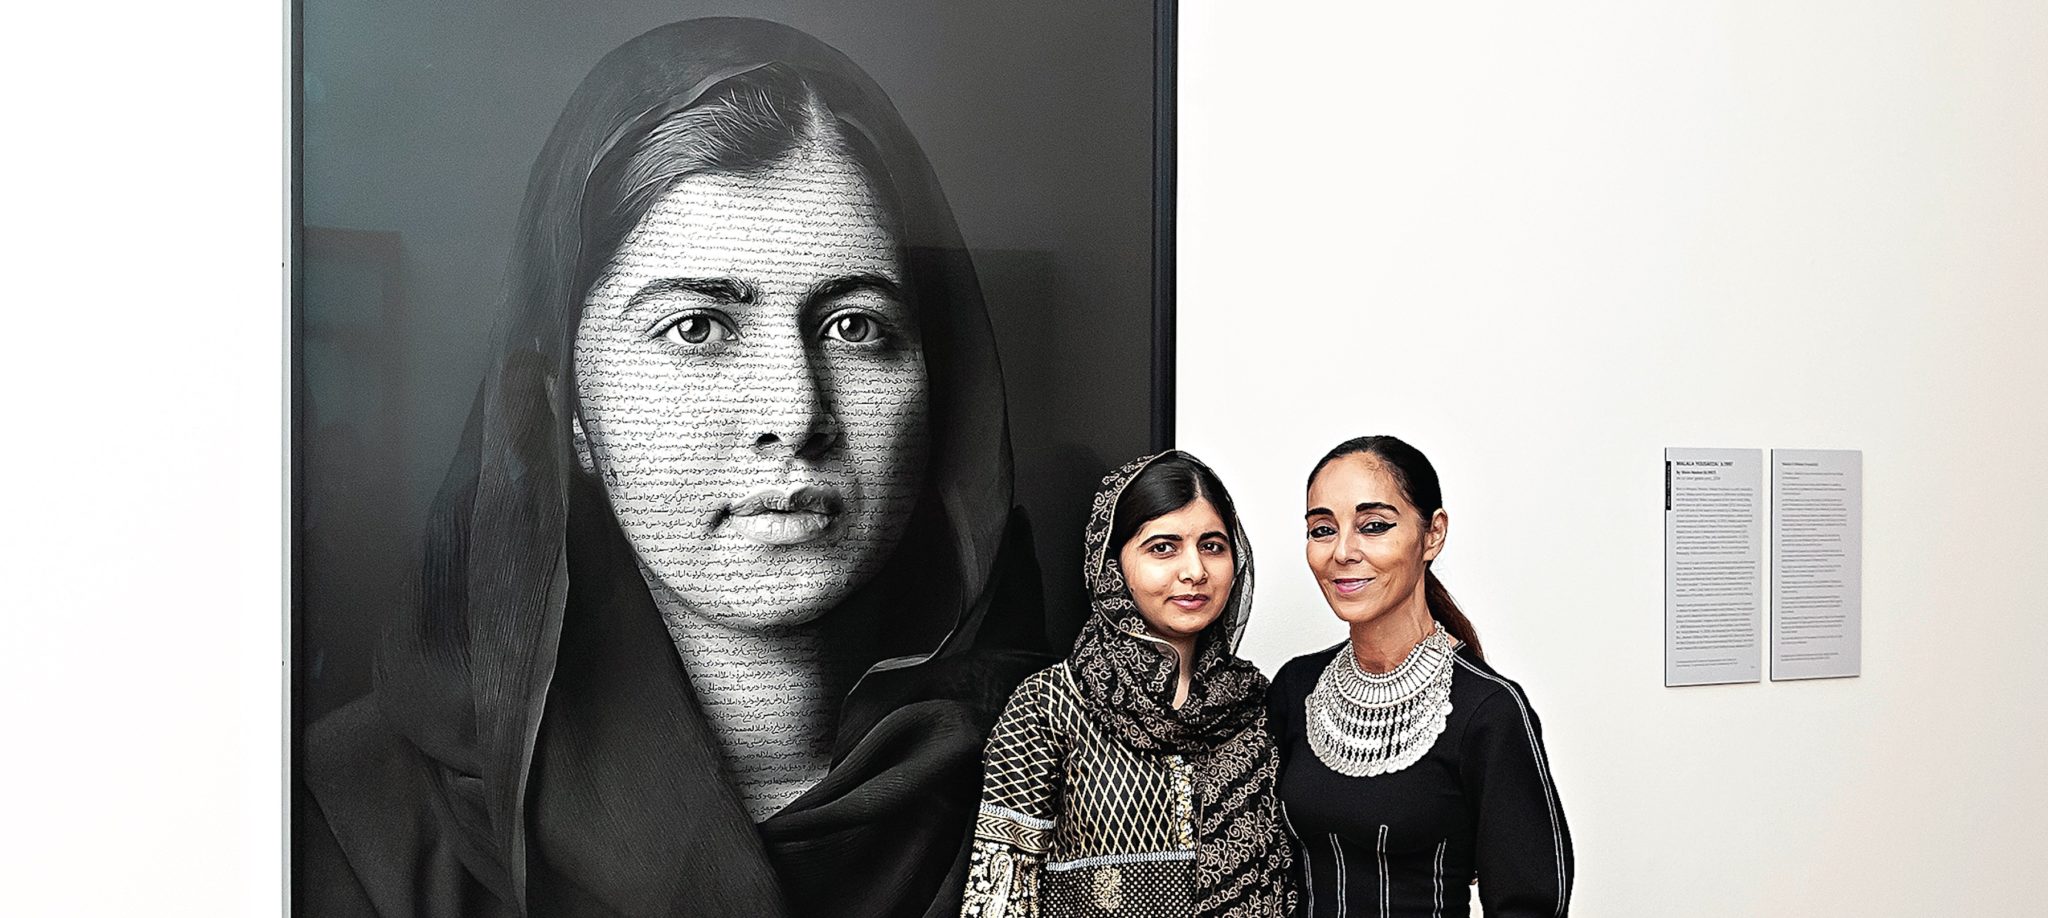 Shirin Neshat (right) with subject Malala Yousafzai, 2014 Nobel Peace Prize recipient, in front of Neshat's painting